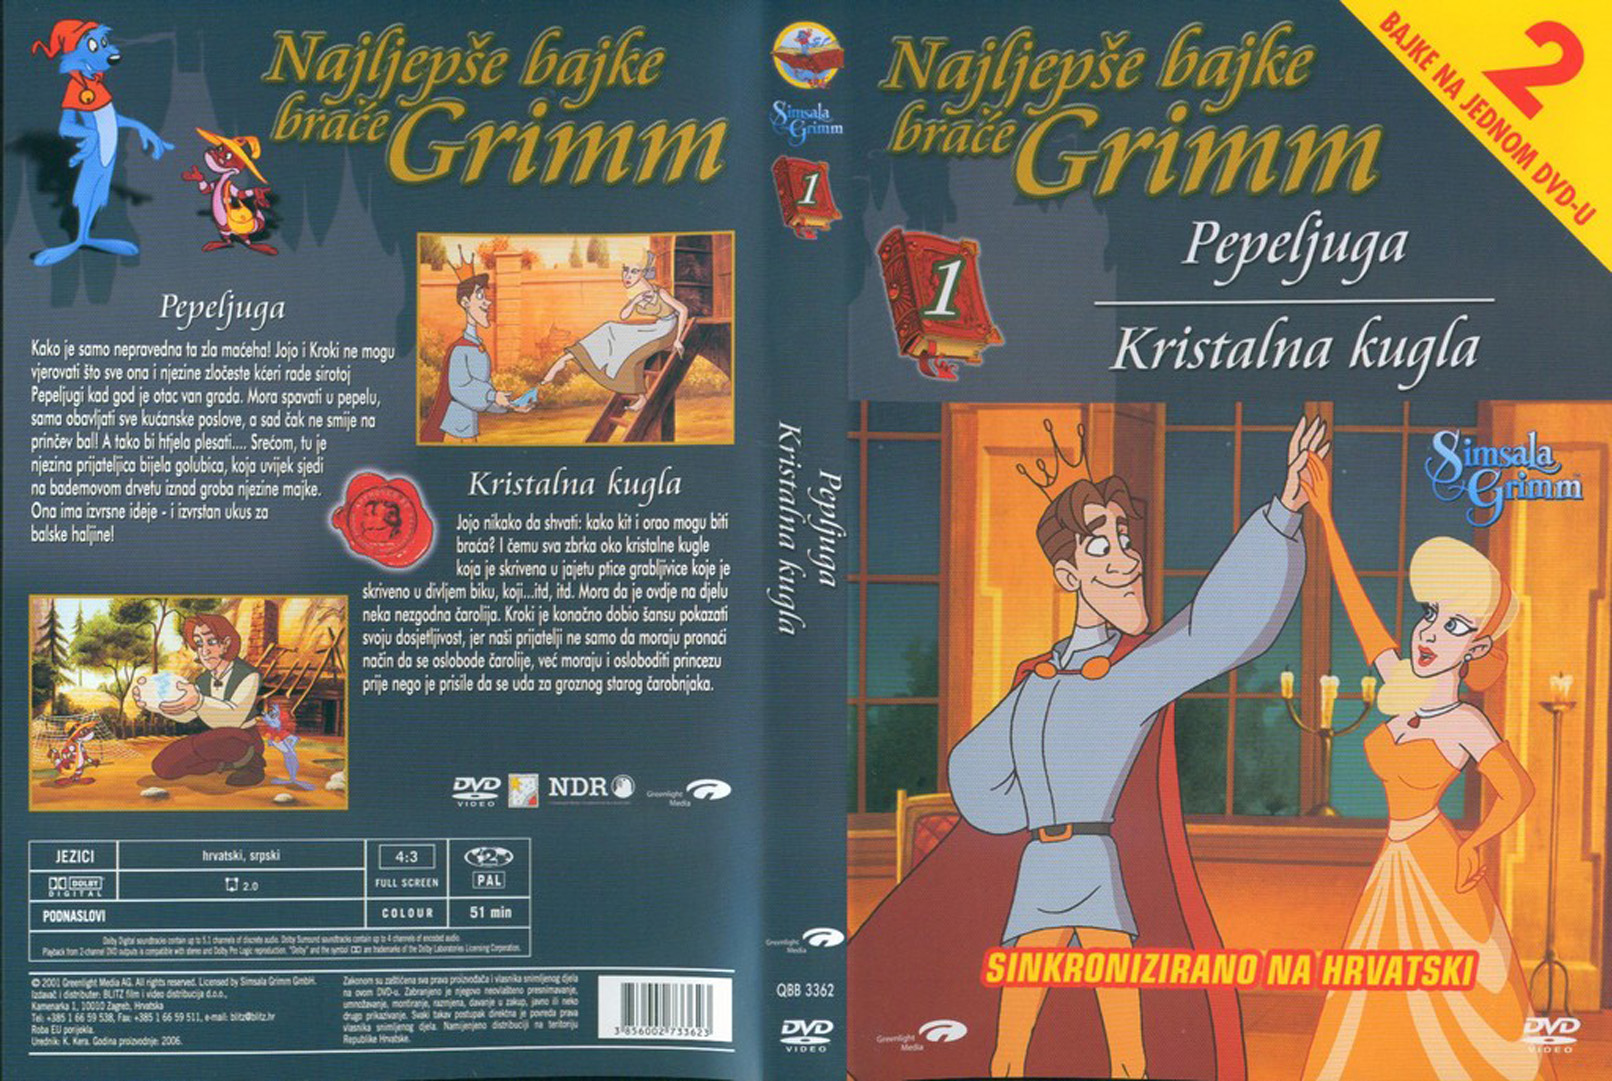 Click to view full size image -  DVD Cover - 0-9 - 001_pepeljuga_kristalna_dvd - 001_pepeljuga_kristalna_dvd.jpg